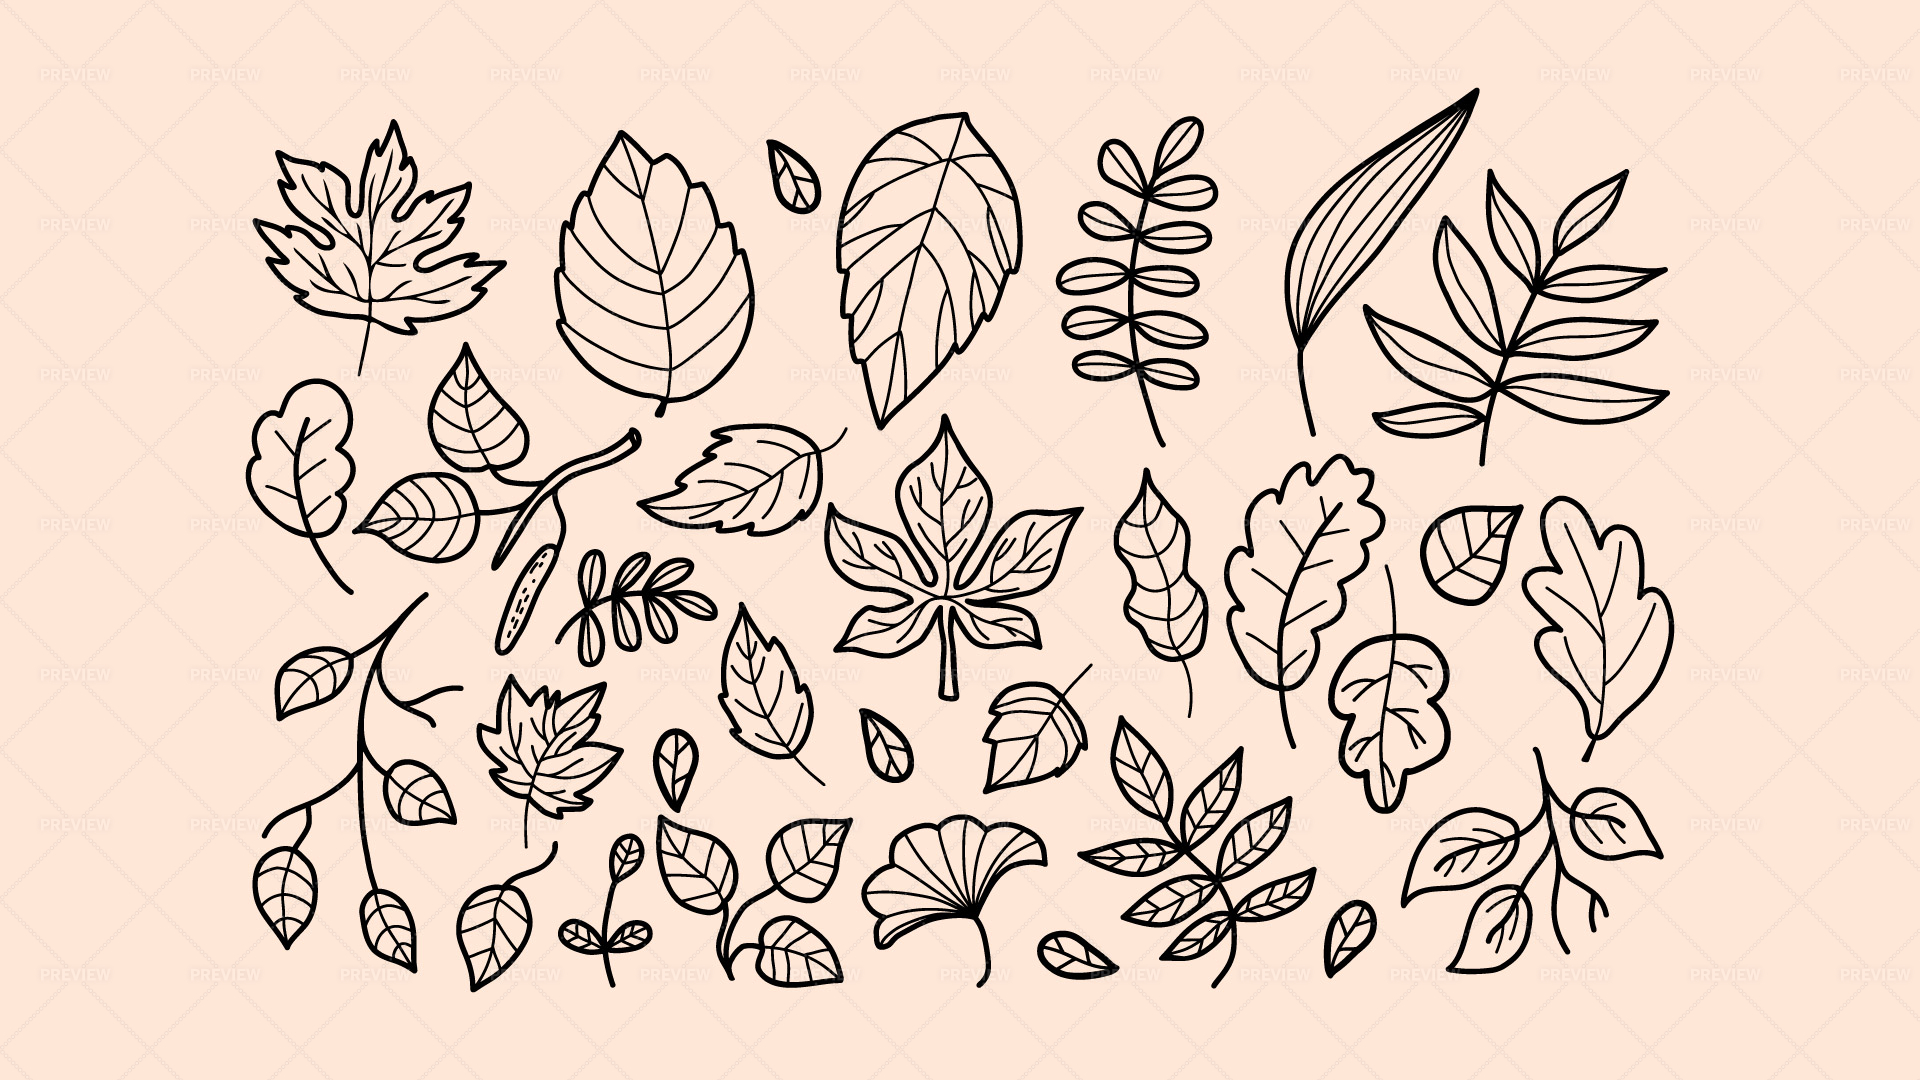 Fall Leaves Drawing Activity [Part 1]